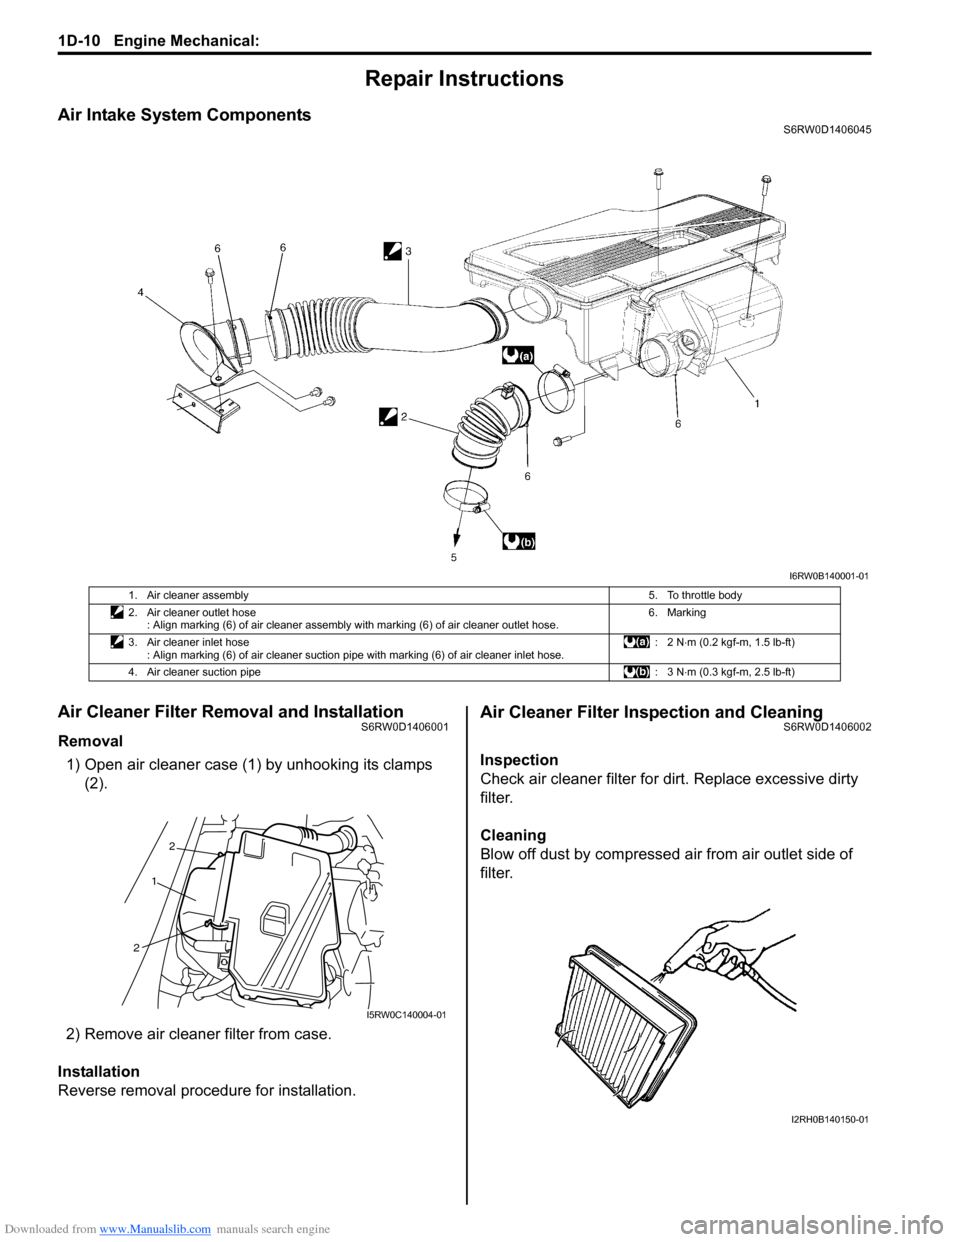 SUZUKI SX4 2006 1.G Service Workshop Manual Downloaded from www.Manualslib.com manuals search engine 1D-10 Engine Mechanical: 
Repair Instructions
Air Intake System ComponentsS6RW0D1406045
Air Cleaner Filter Removal and InstallationS6RW0D140600